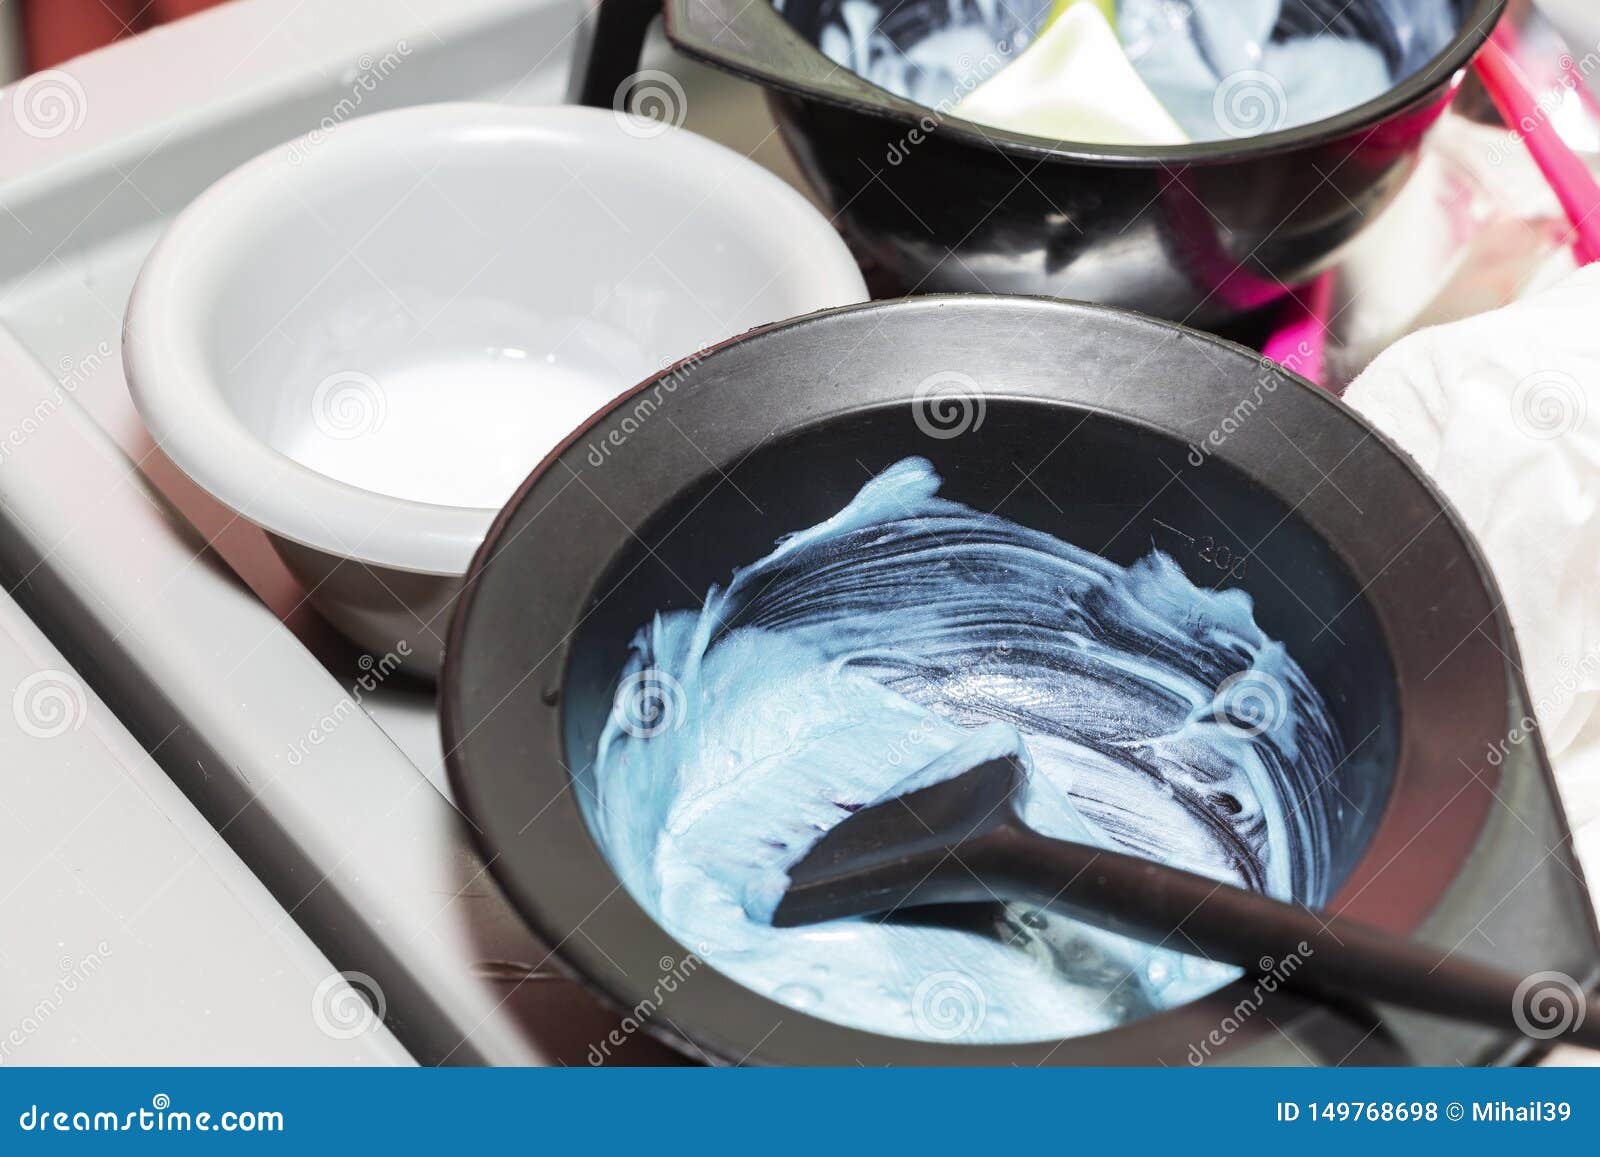 Hair Dye in Bowls and Brush for Hair Coloring Stock Photo - Image of  mixing, bowls: 149768698